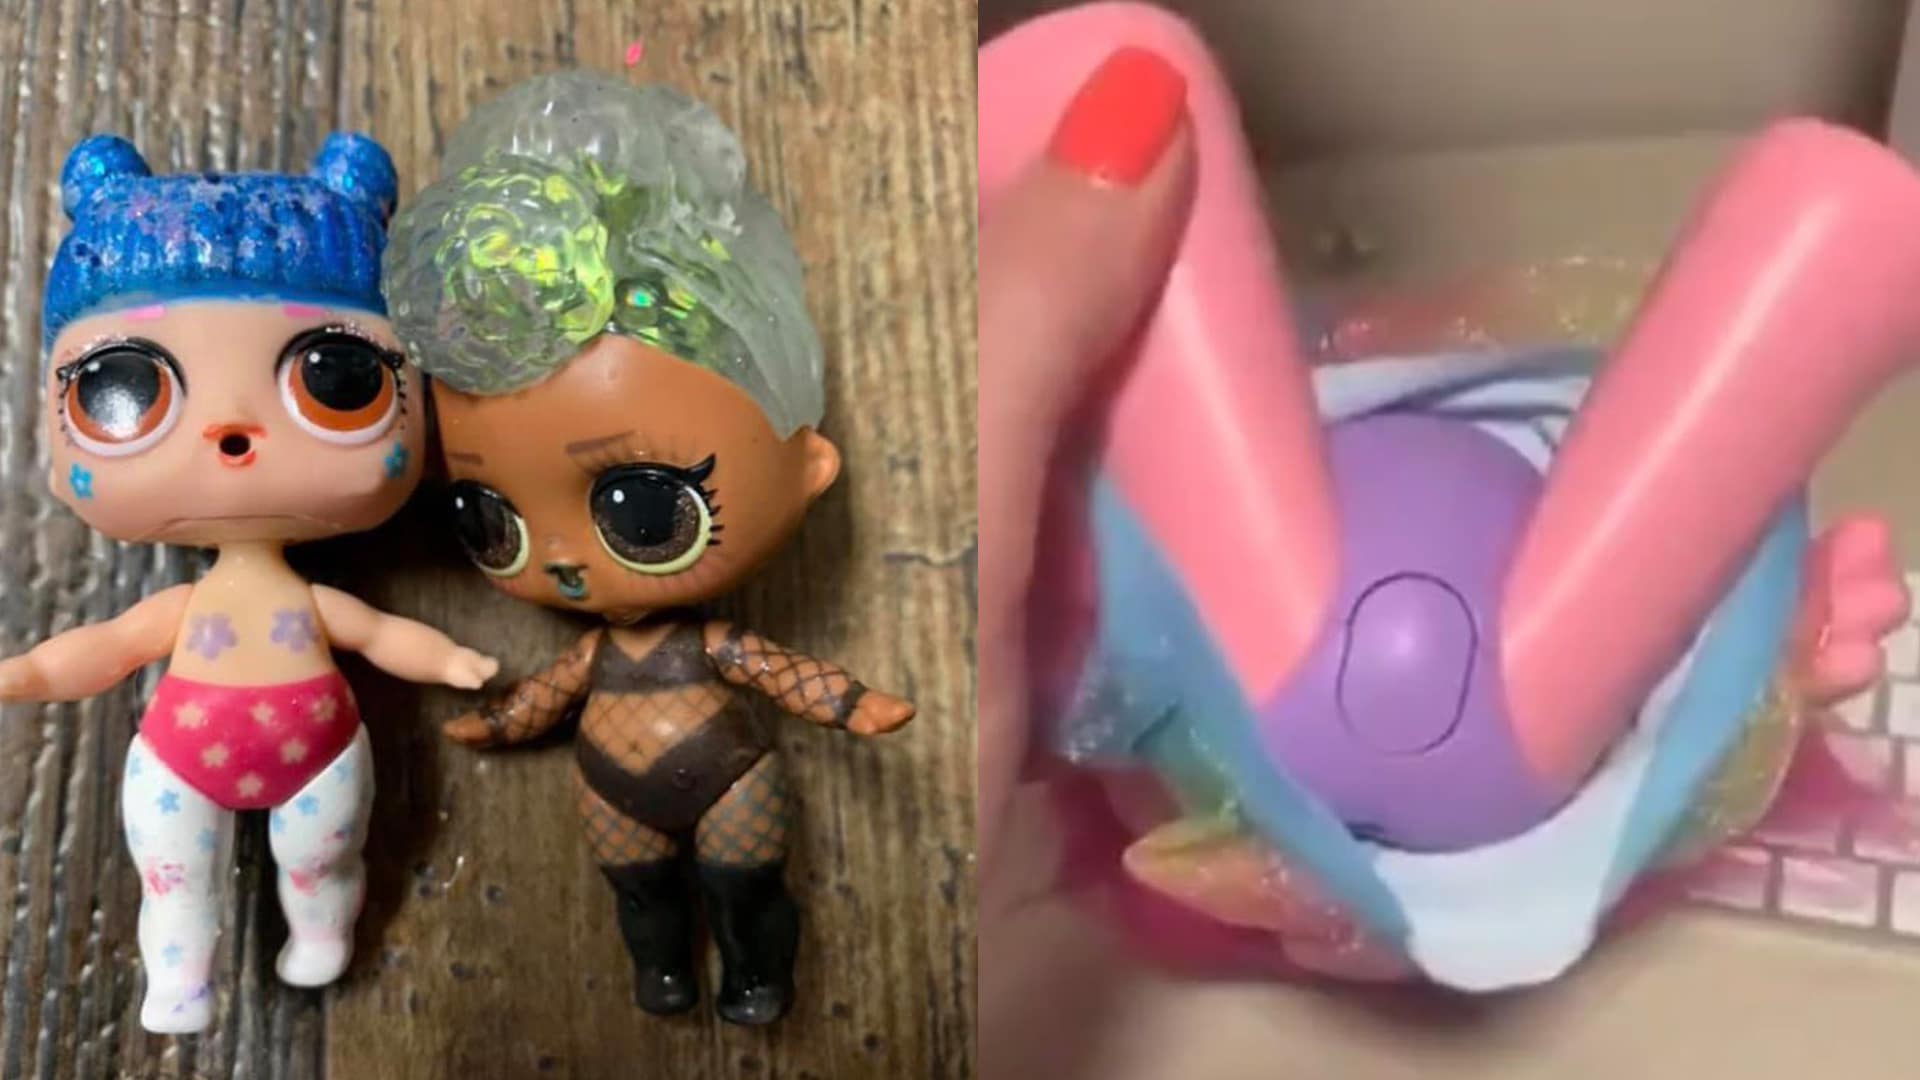 TikTok Moms Outraged at Inappropriate LOL Dolls After Viral Videos.